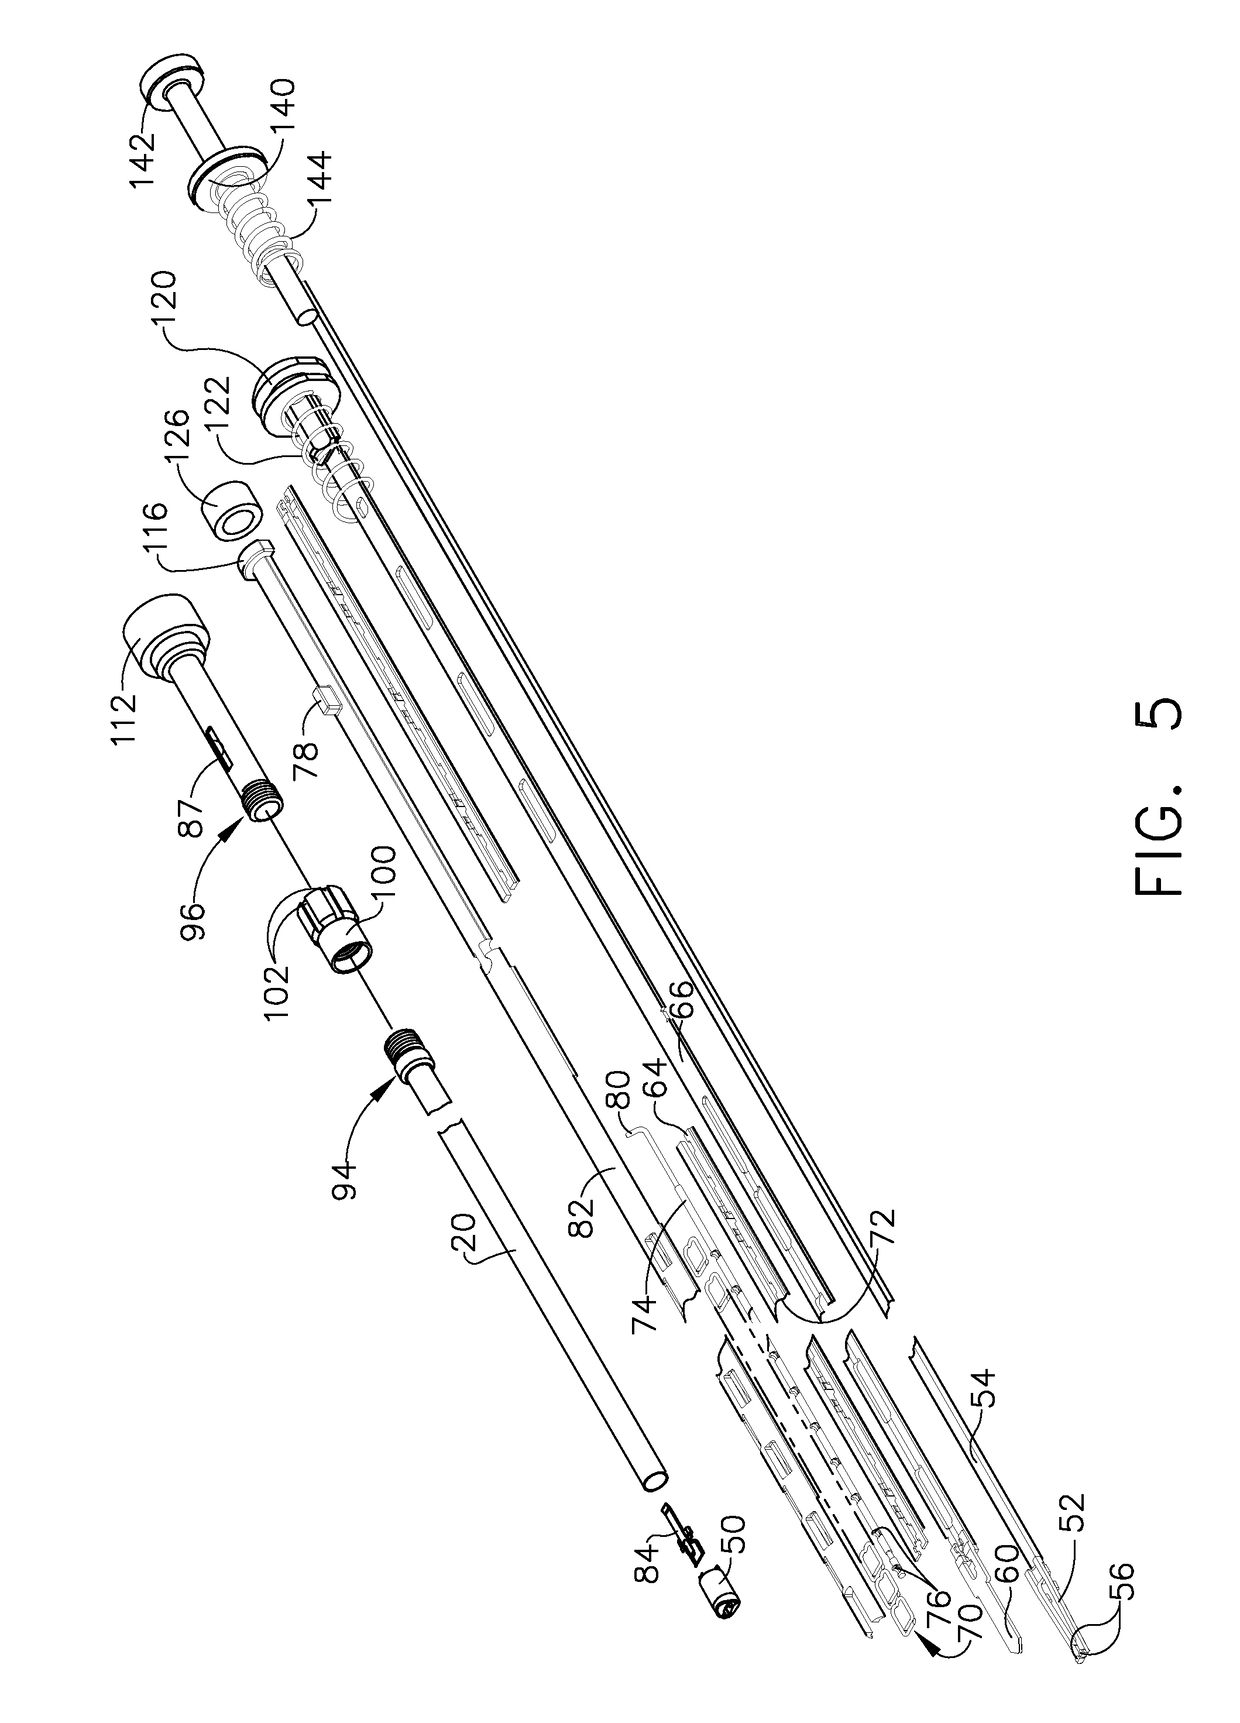 Surgical stapler fastening device with adjustable anvil